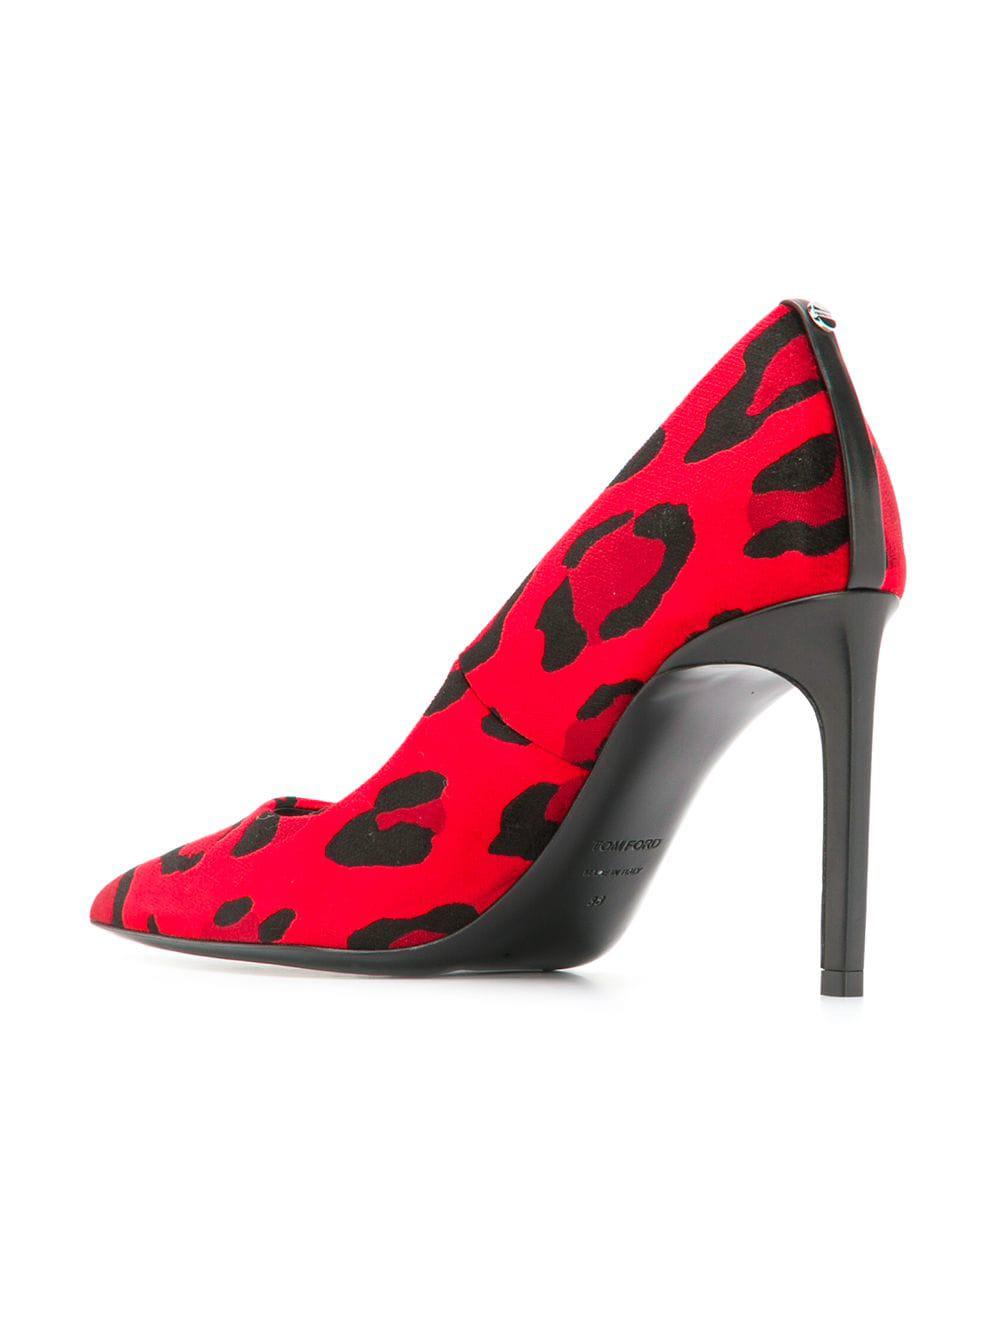 Tom Ford Leopard Print Pumps in Red | Lyst